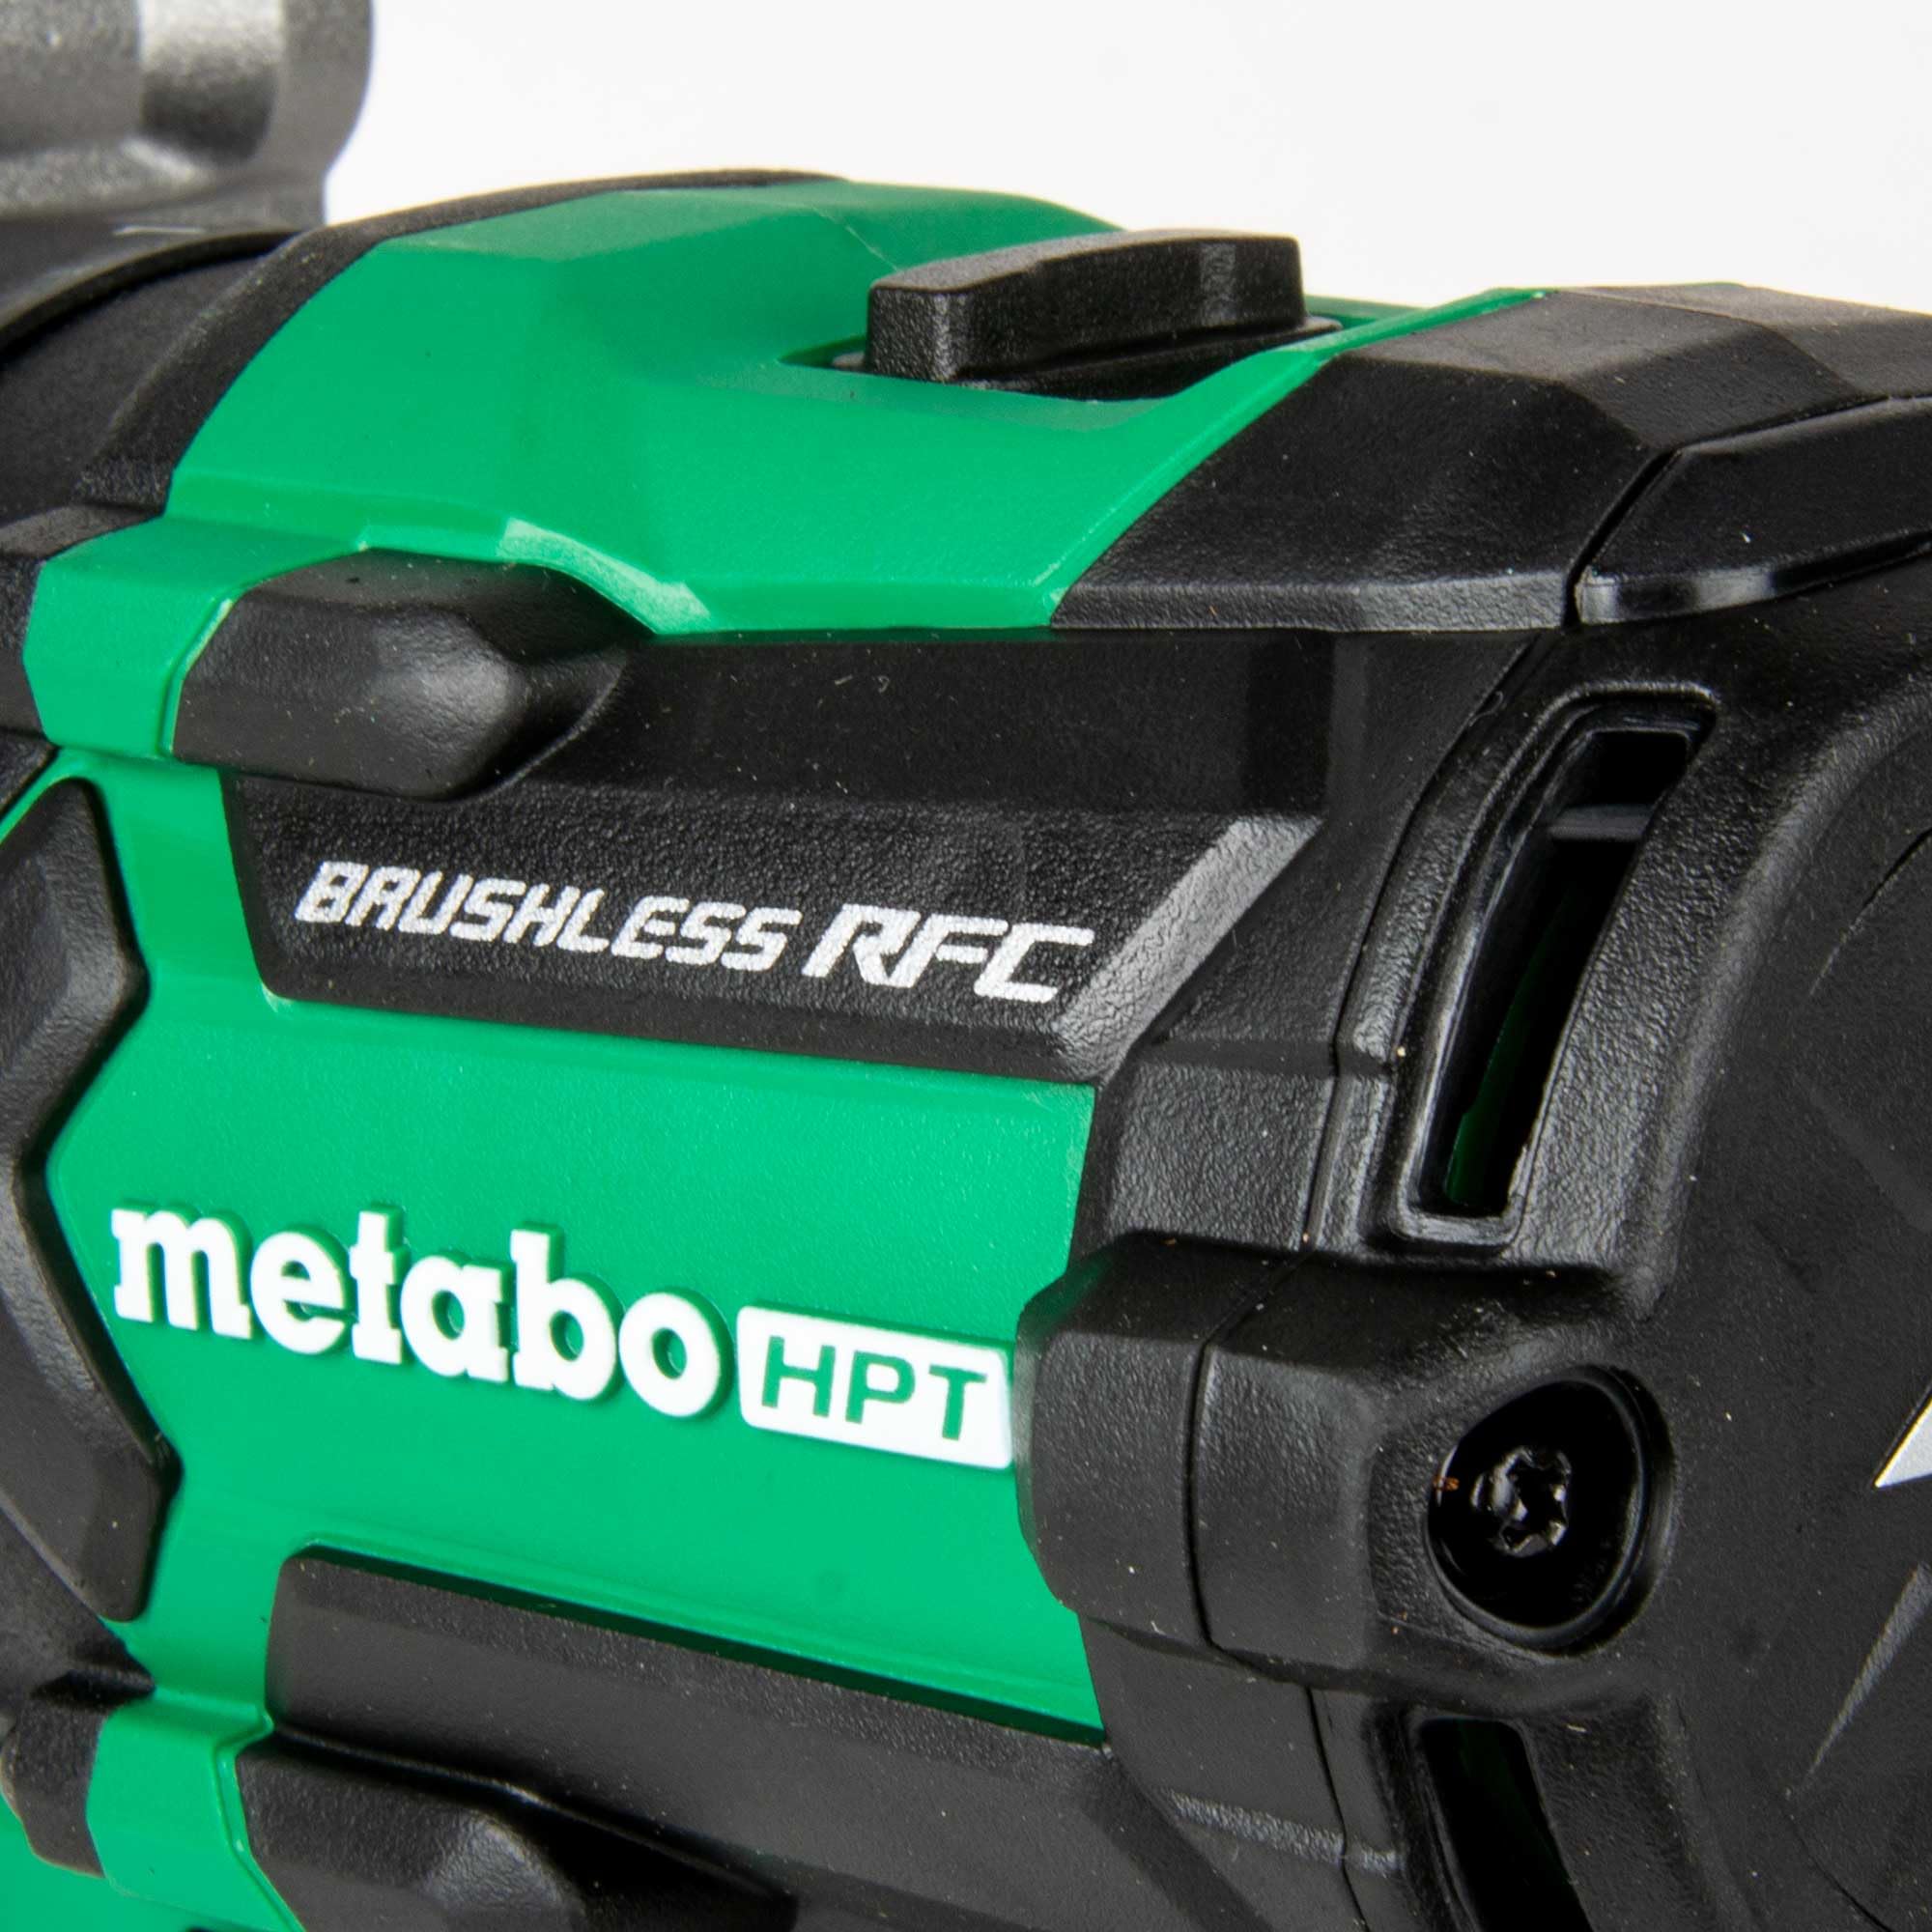 Metabo HPT 36V MultiVolt™ Cordless ½-Inch Hammer Drill Kit | 1,400 in-lbs. Max Torque | Reactive Force Control | Optional AC Adapter | DV36DC